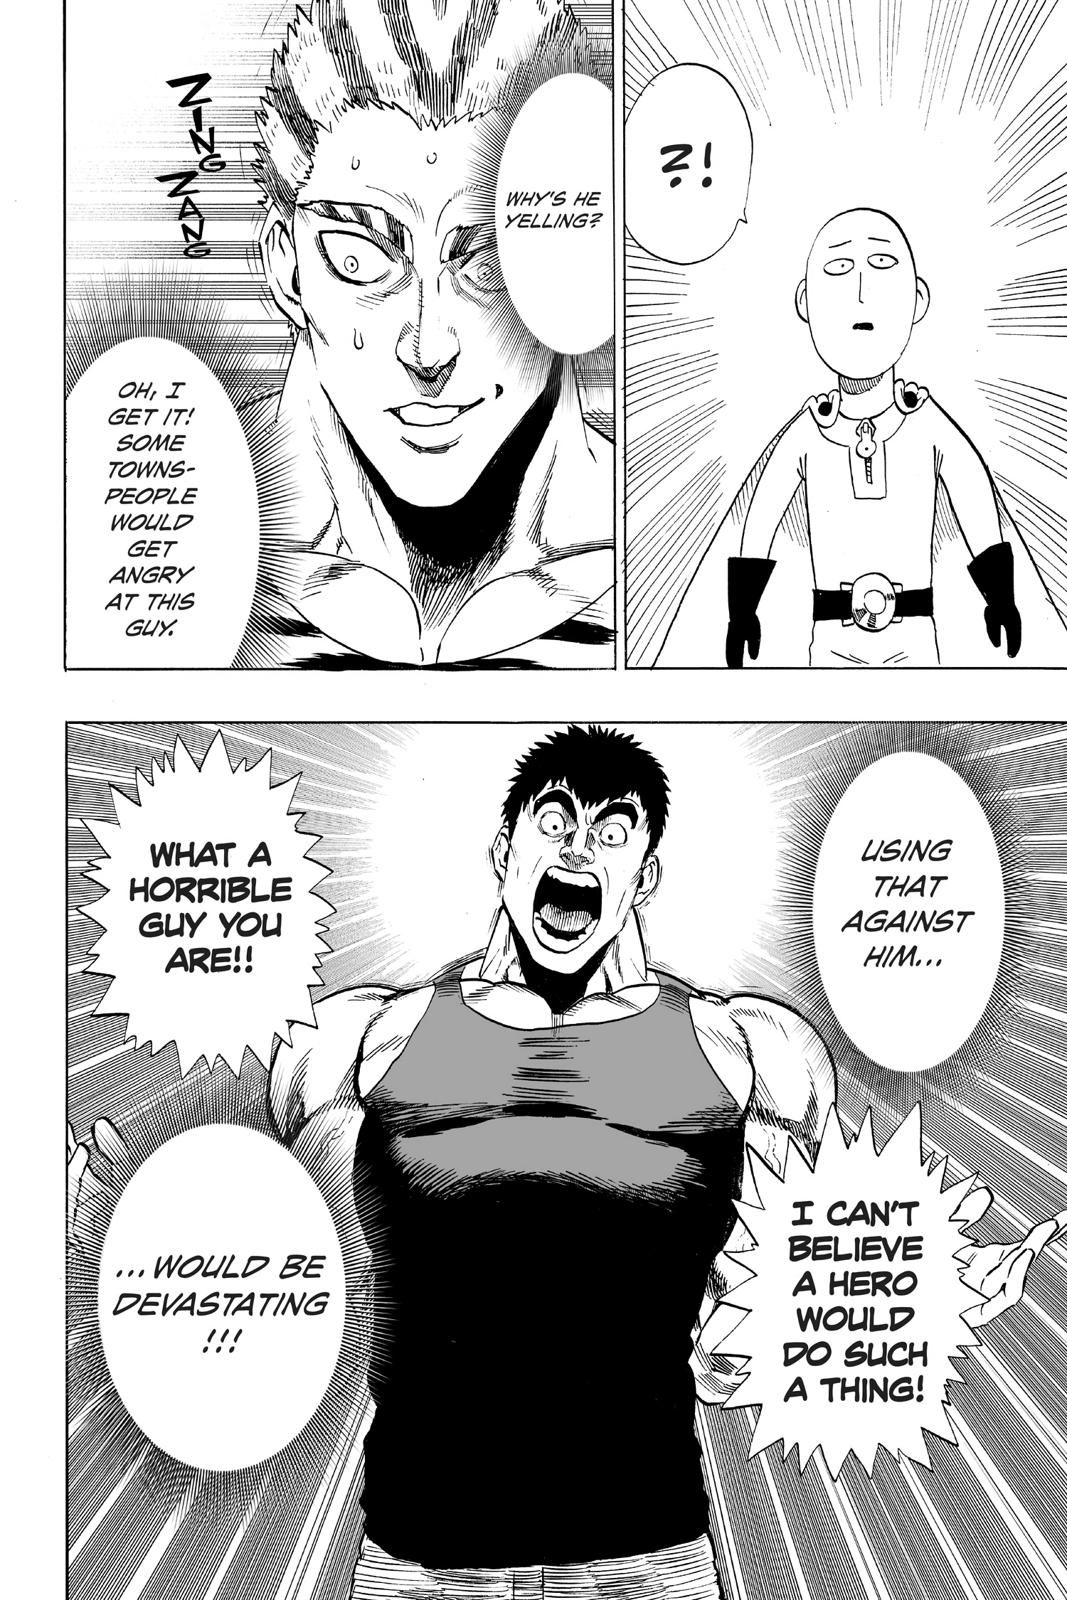 One-Punch Man, Punch 22 image 17